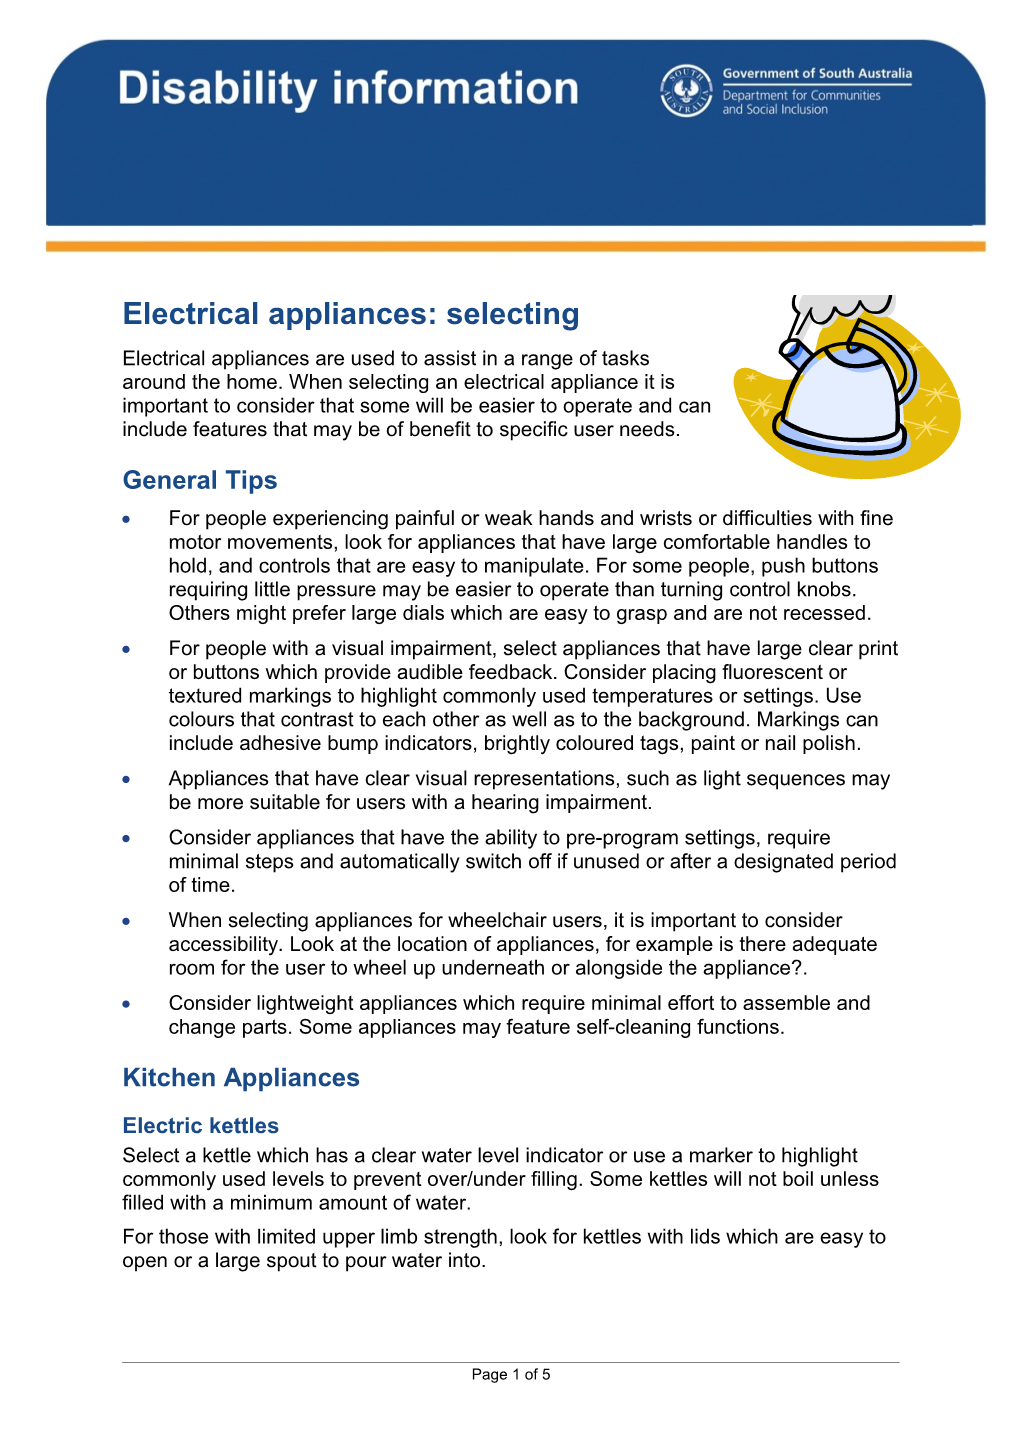 Electrical Appliances: Selecting